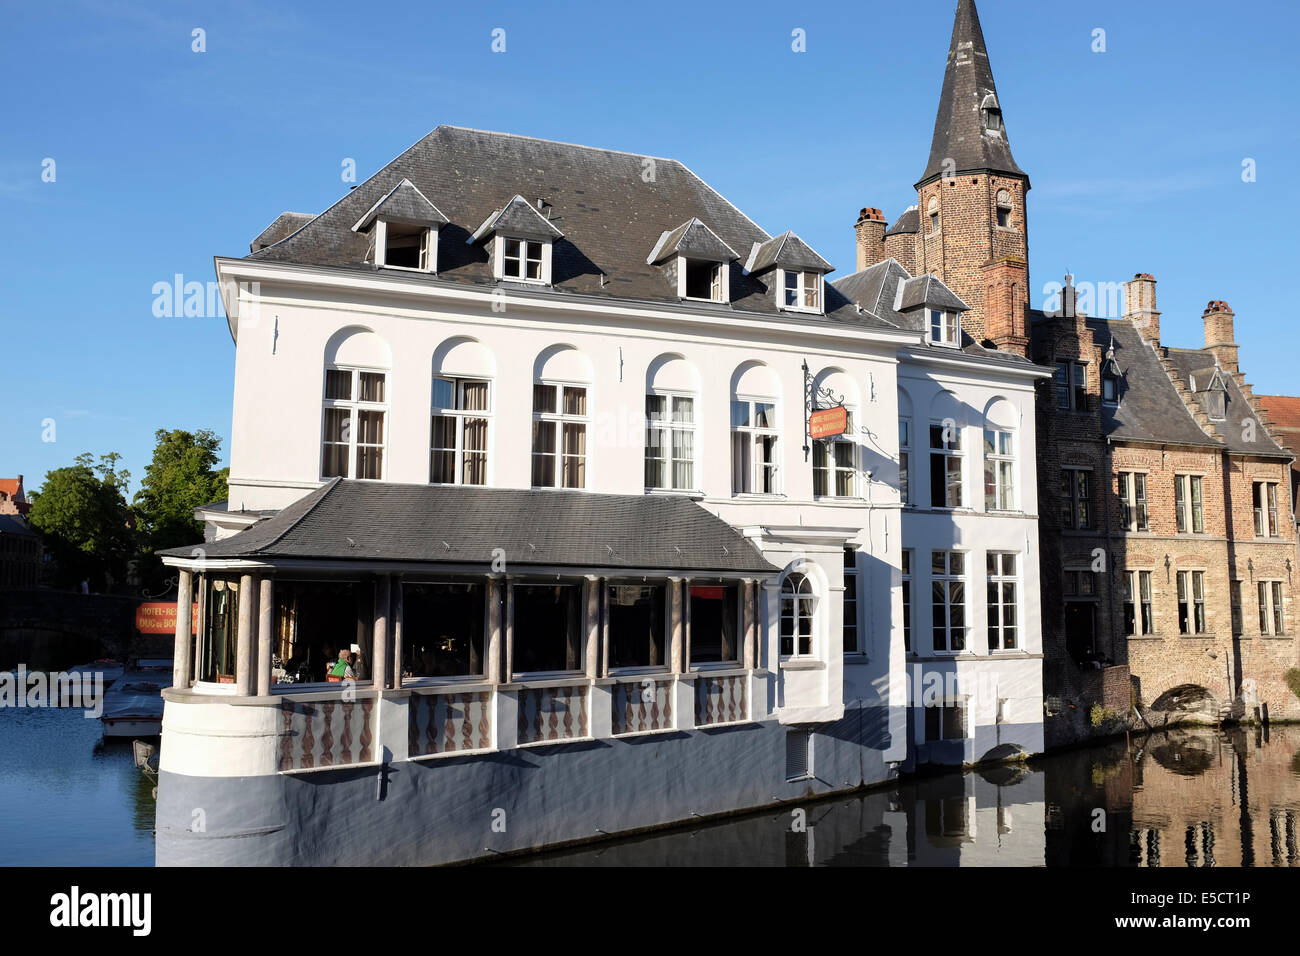 Hotel-Restaurant Duc de Bourgogne from the Rozenhoedkaai in the canal of Bruges old town, Belgium Stock Photo